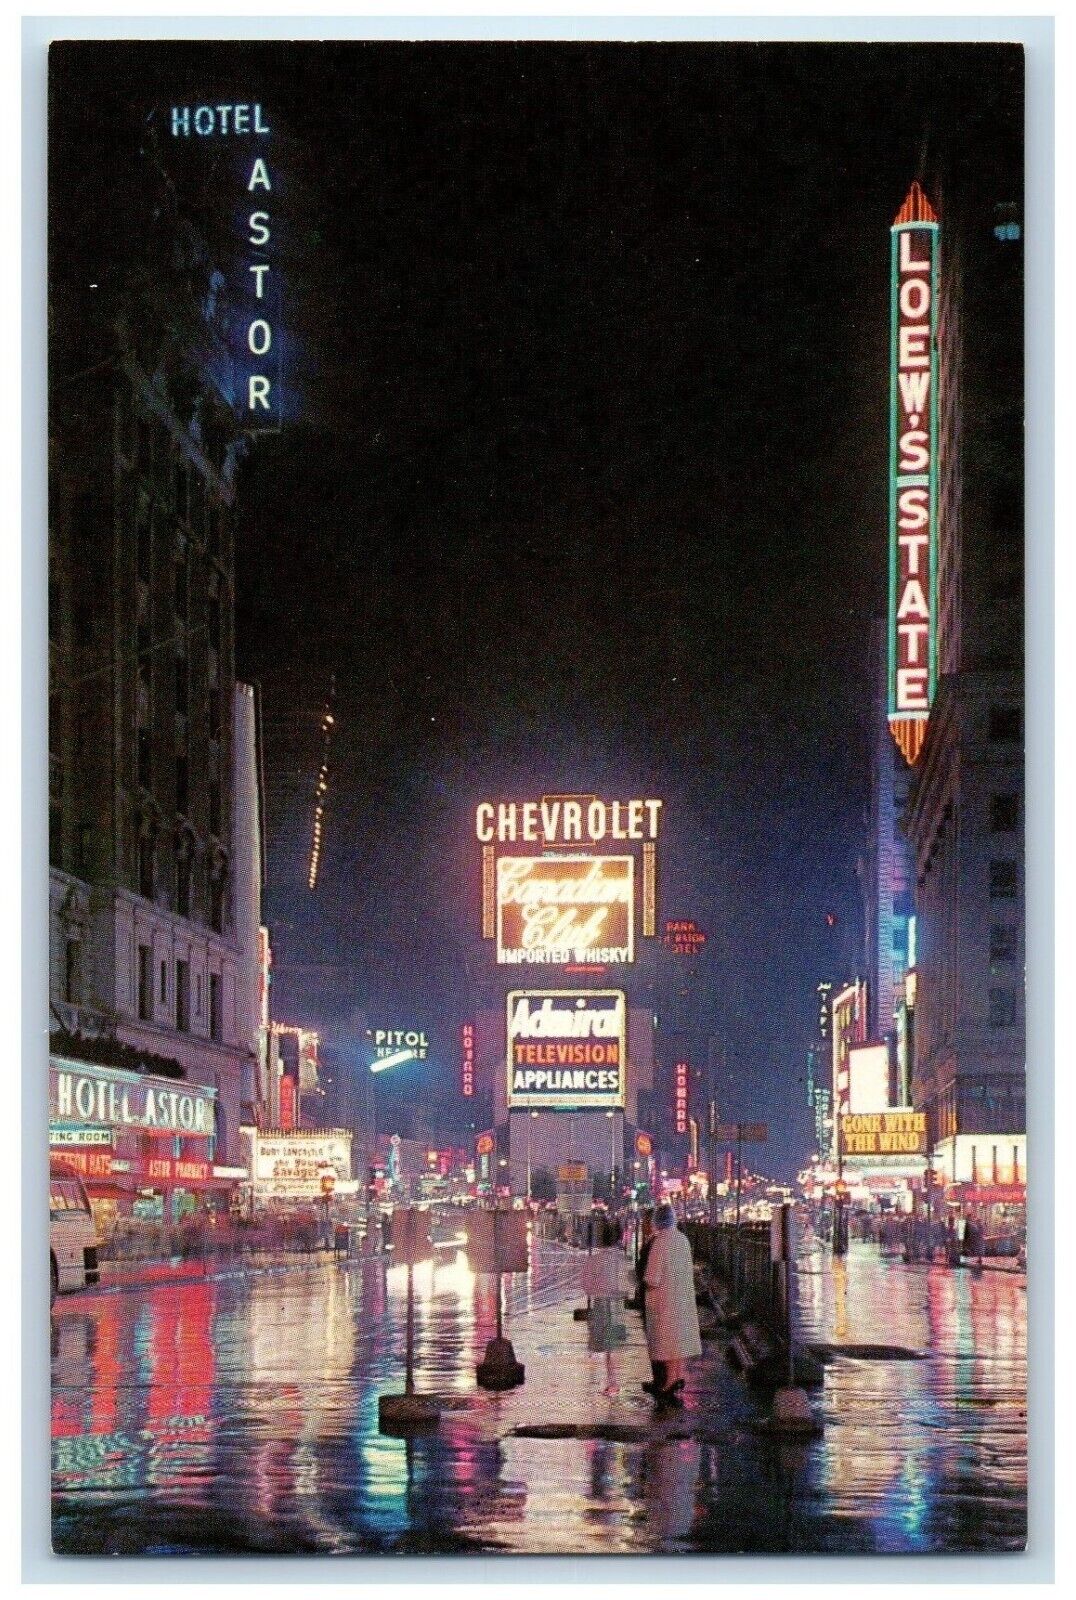 New York NY Postcard Times Square At Night Chevrolet Hotel Astro Loew's State